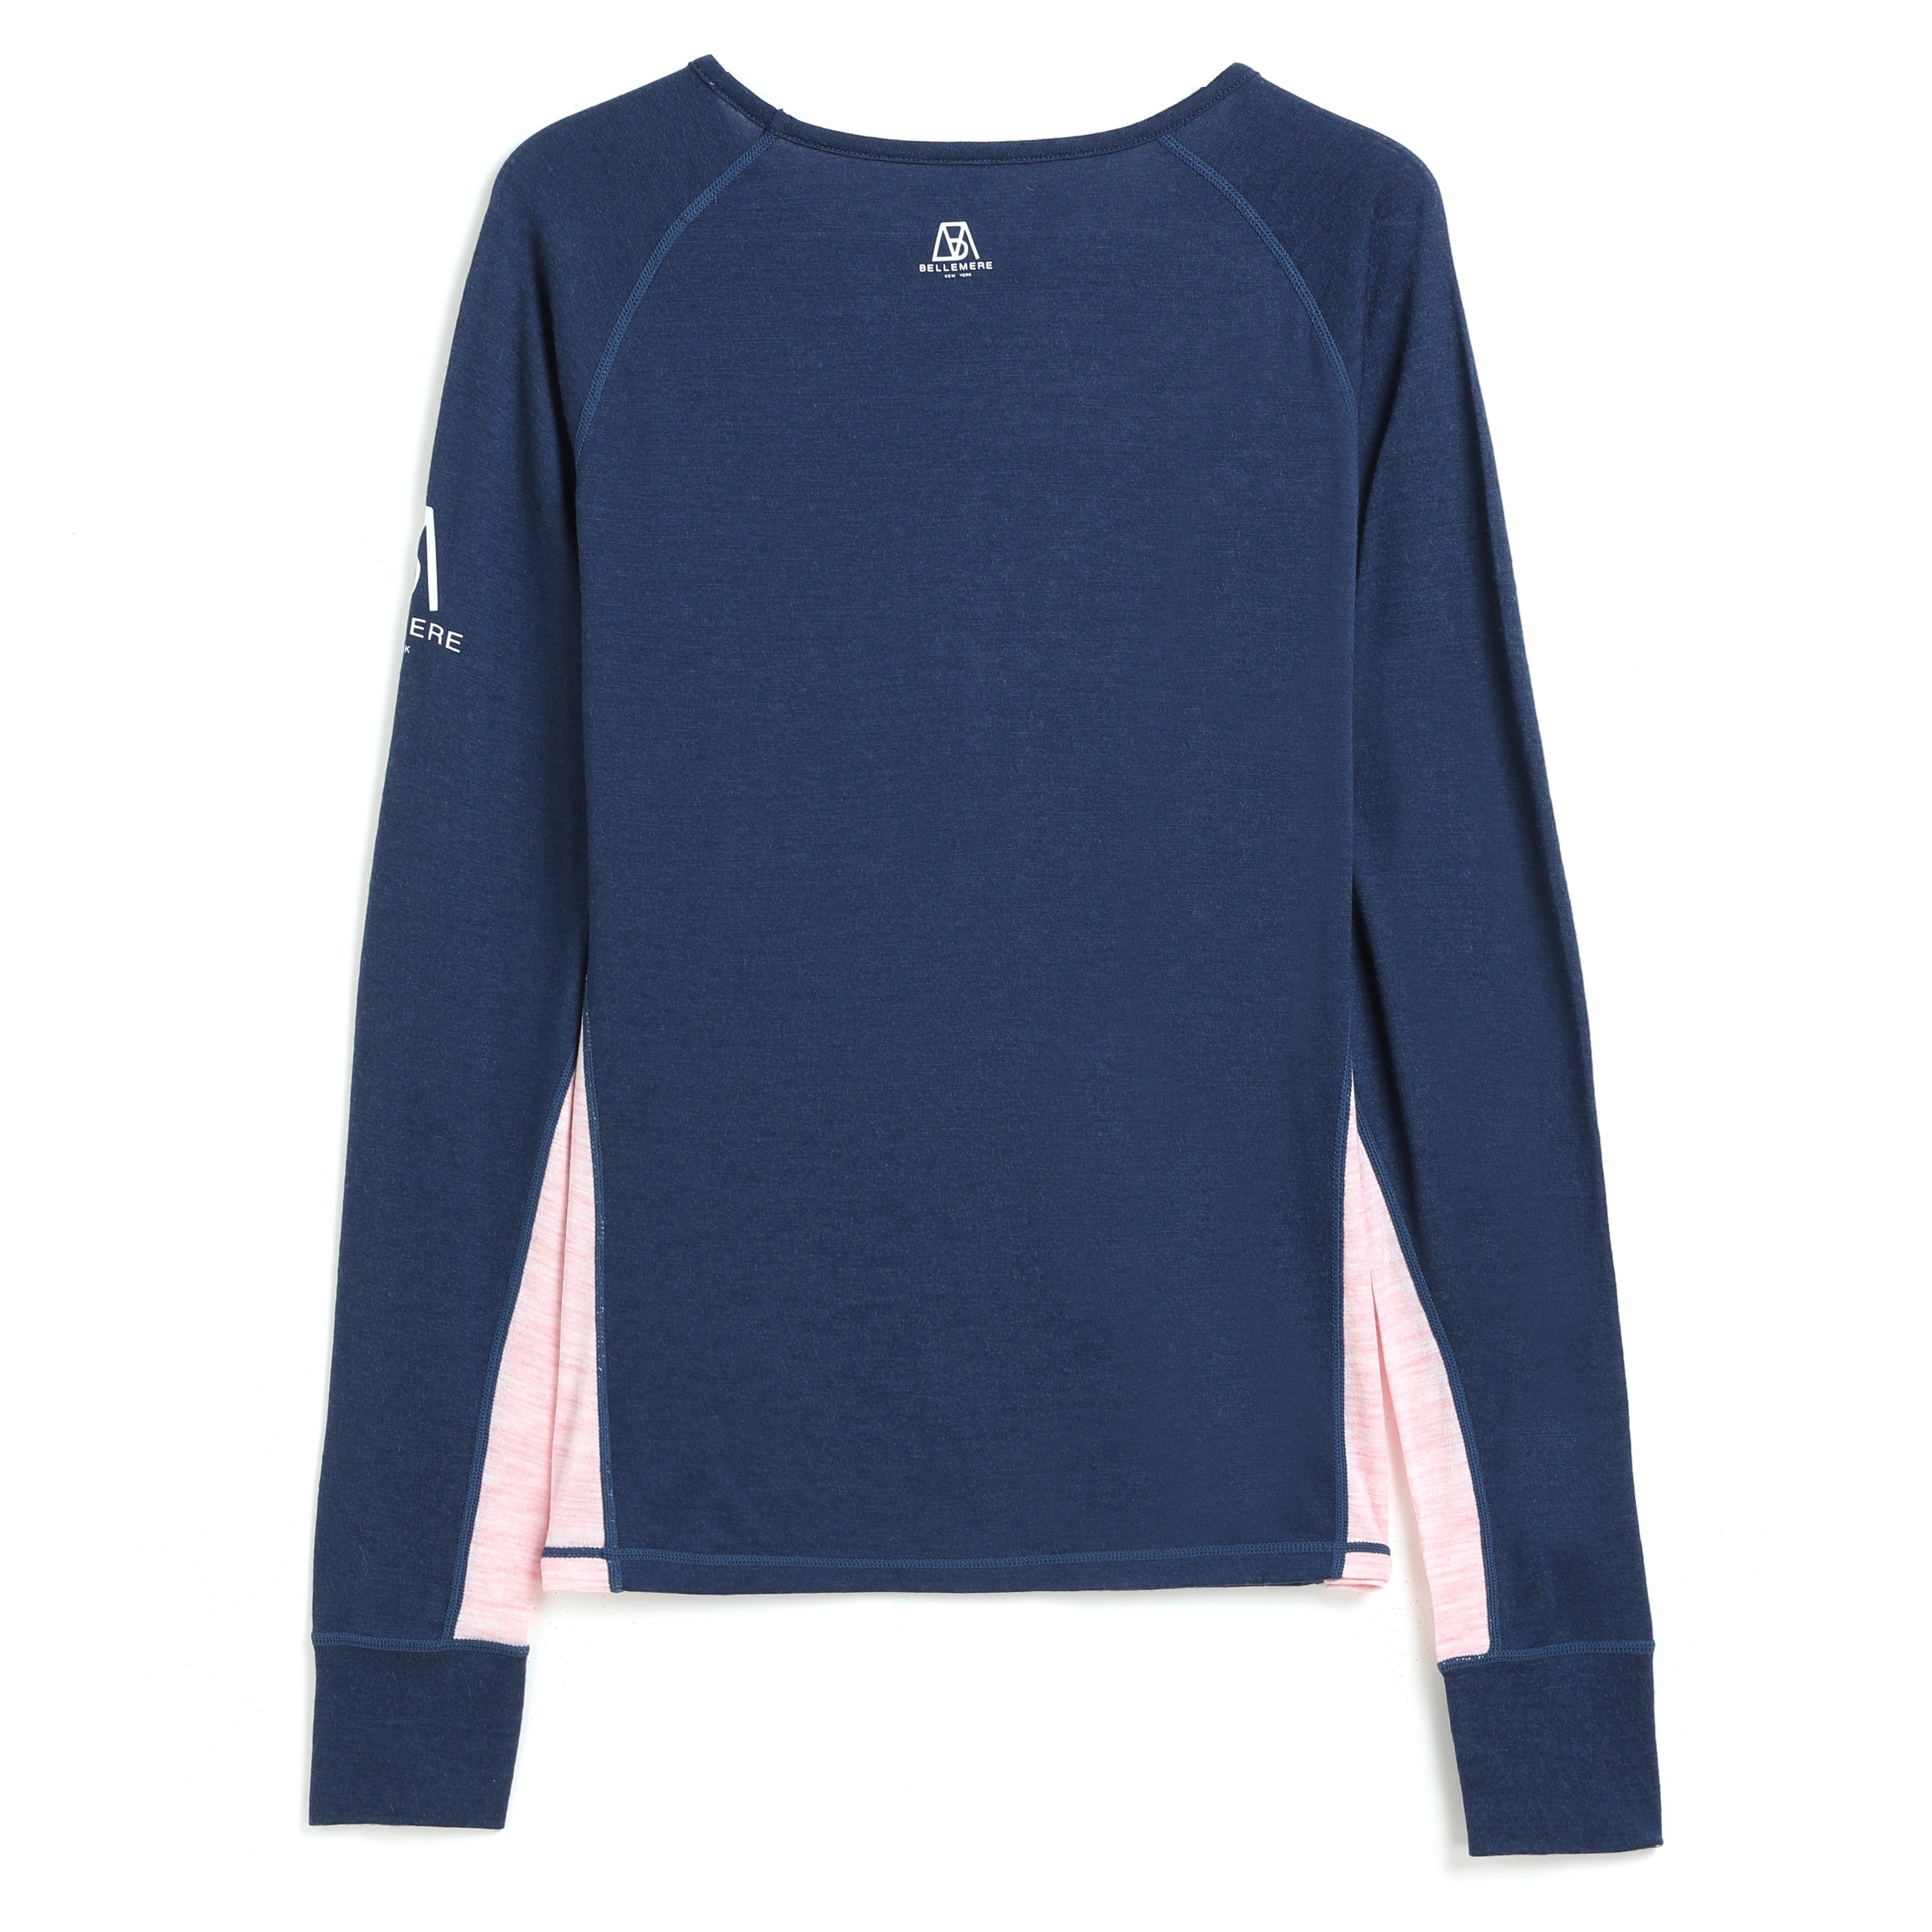 Women's Base Layer Thermal Top